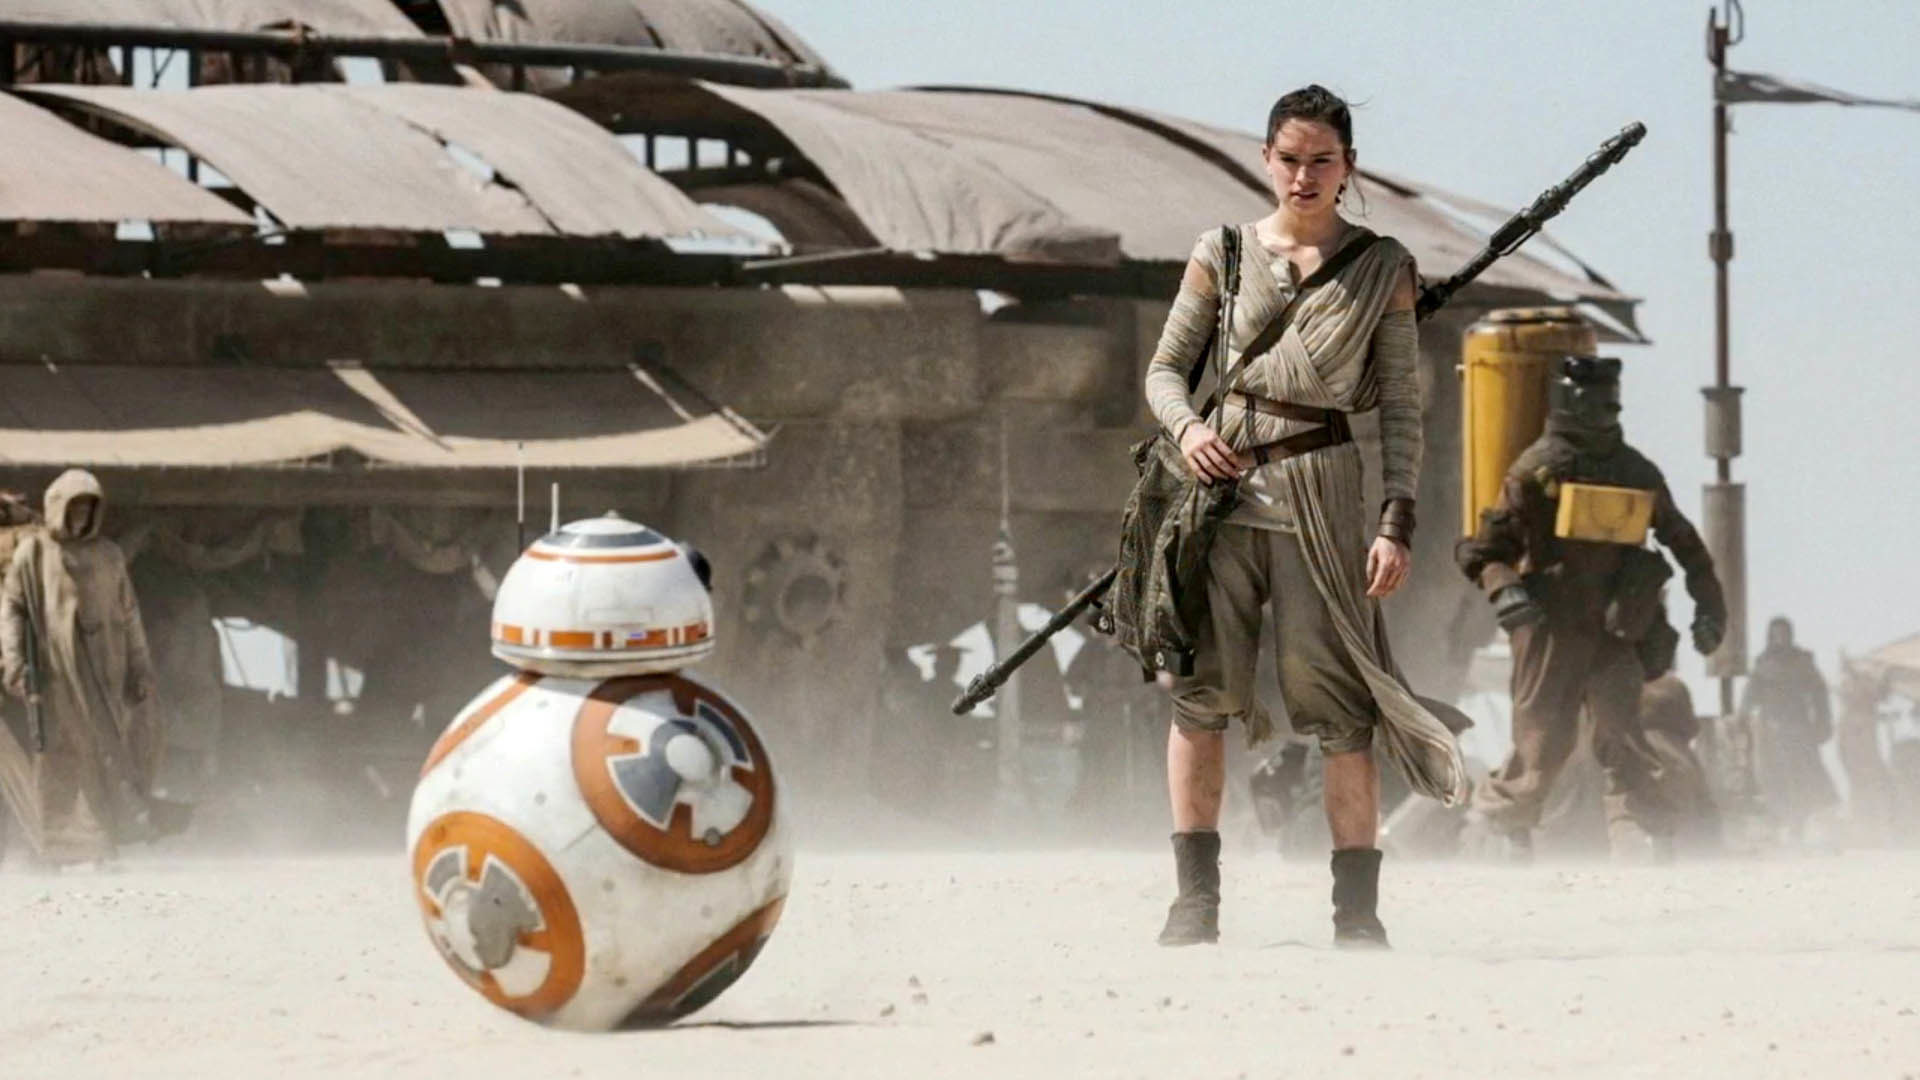 1920x1080 BB-8 and Rey - Star Wars 7: The Force Awakens  wallpaper